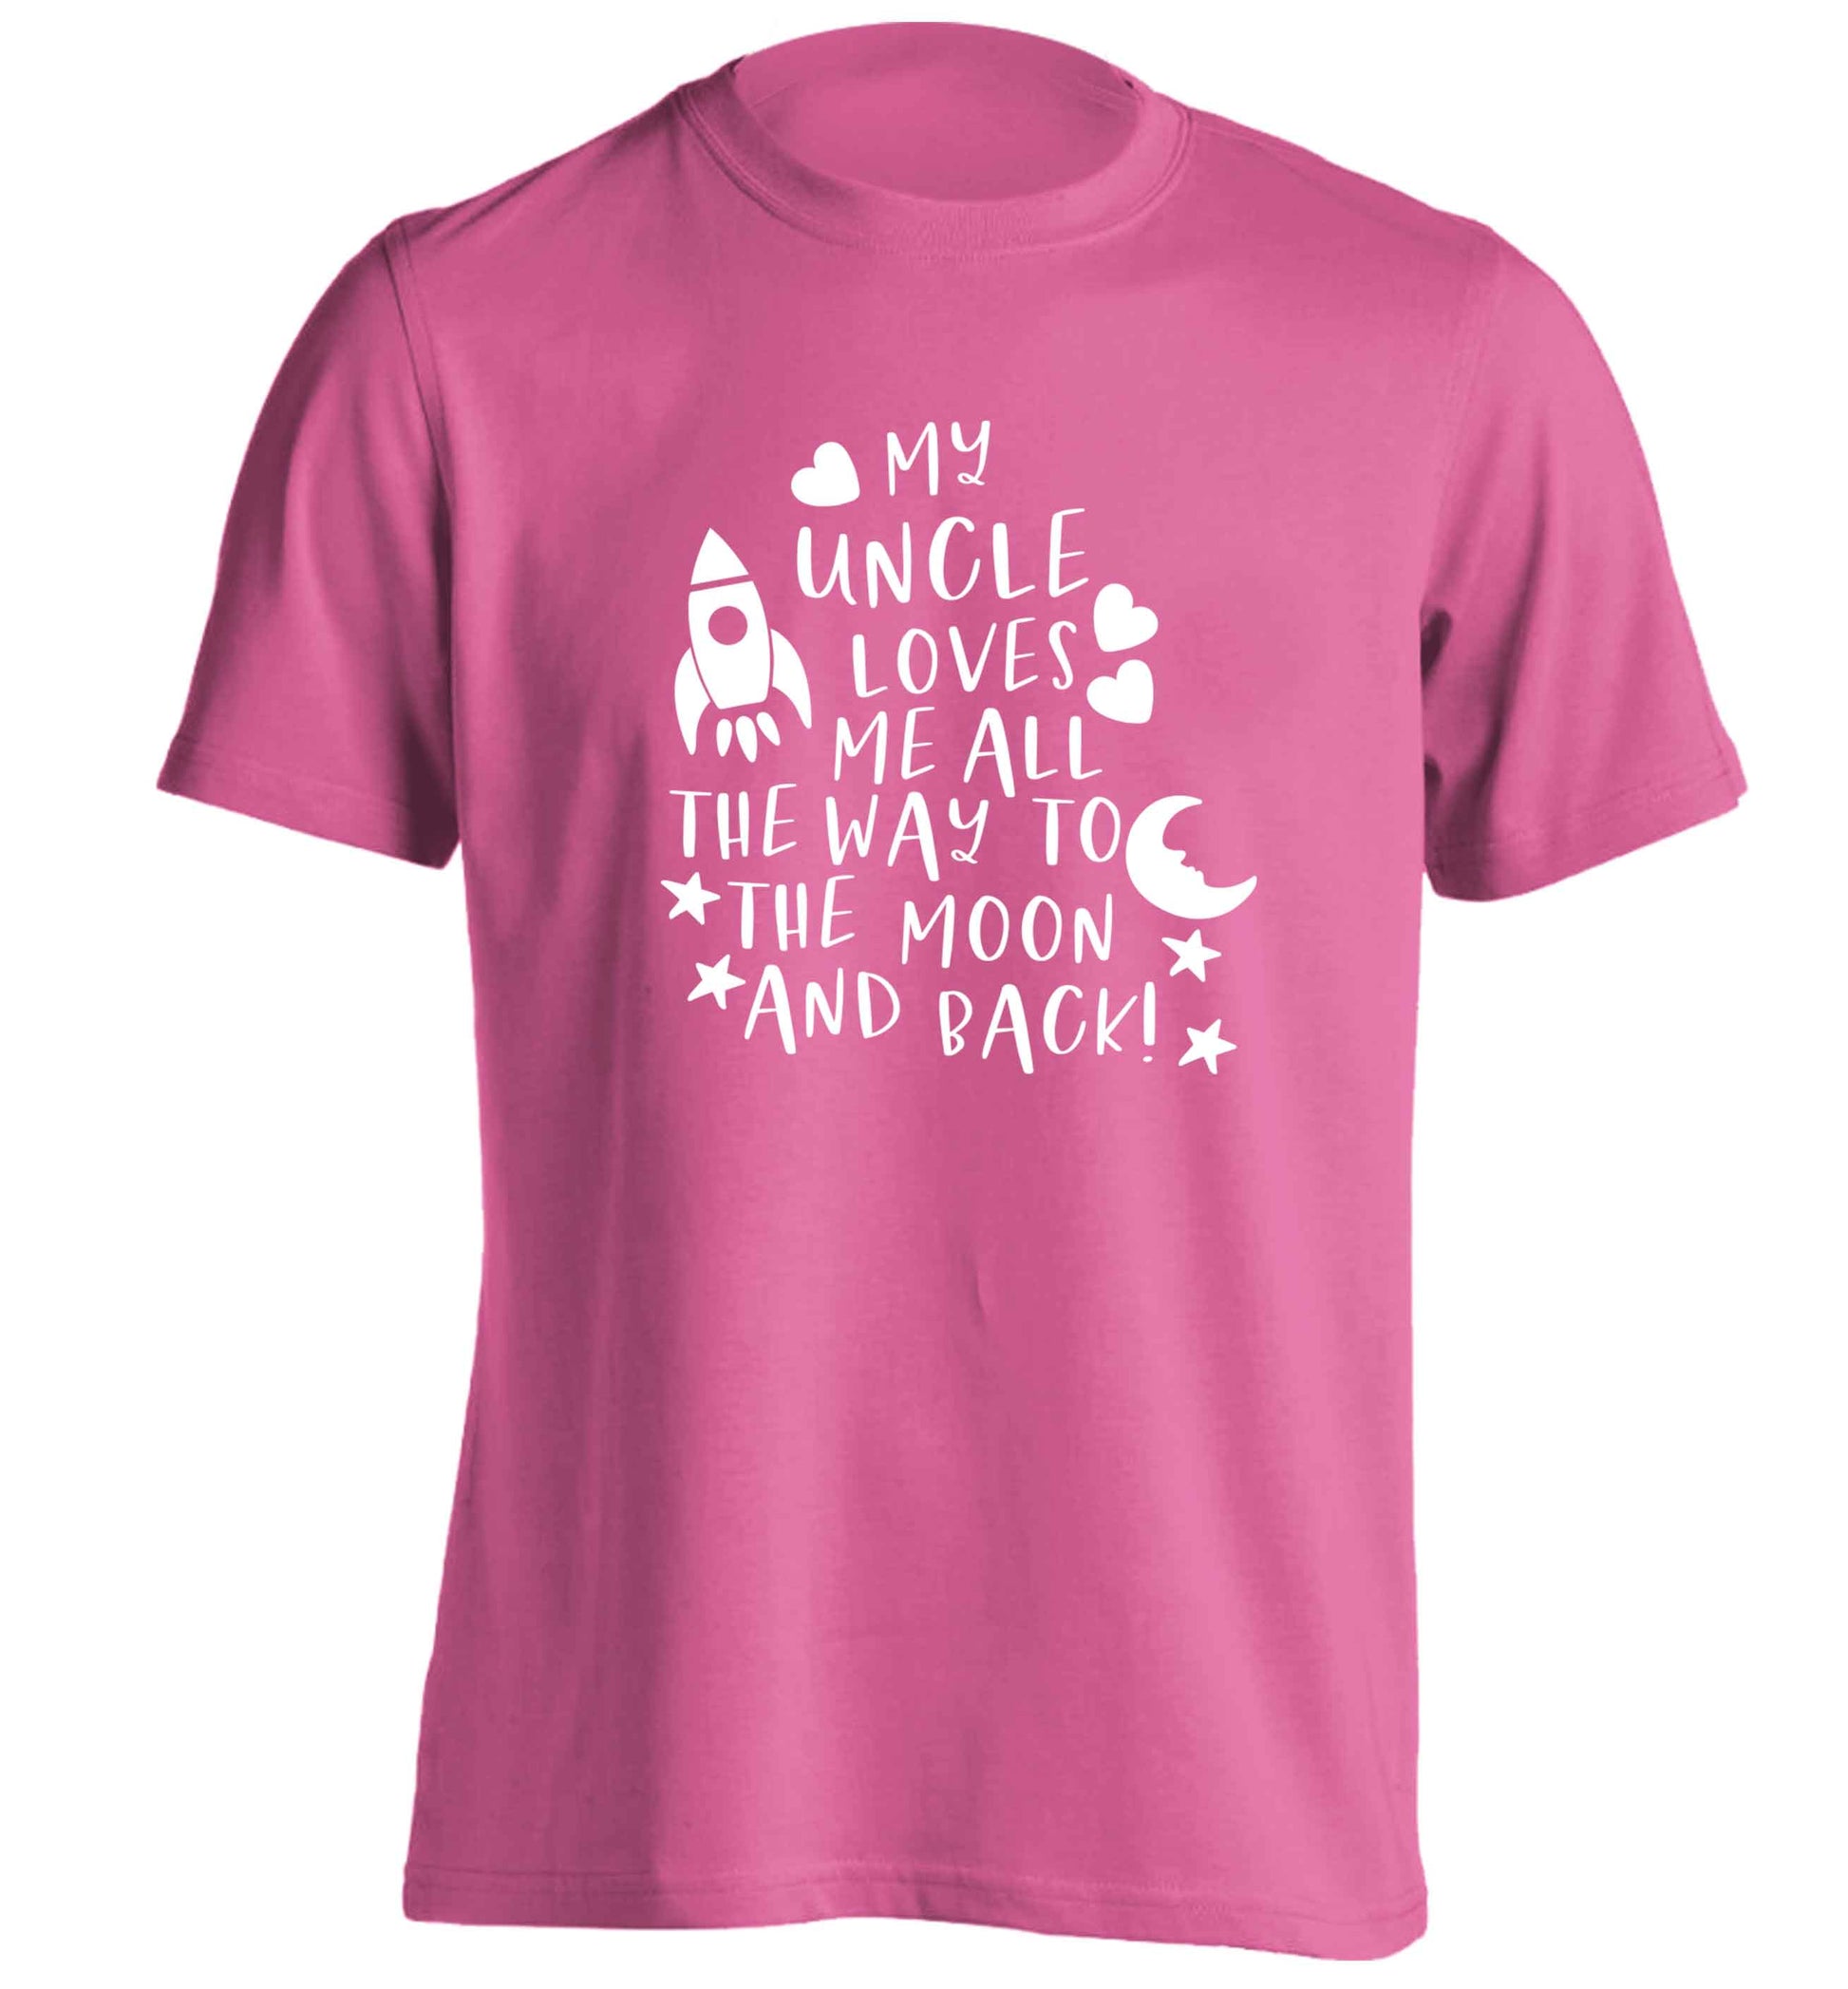 My uncle loves me all the way to the moon and back adults unisex pink Tshirt 2XL